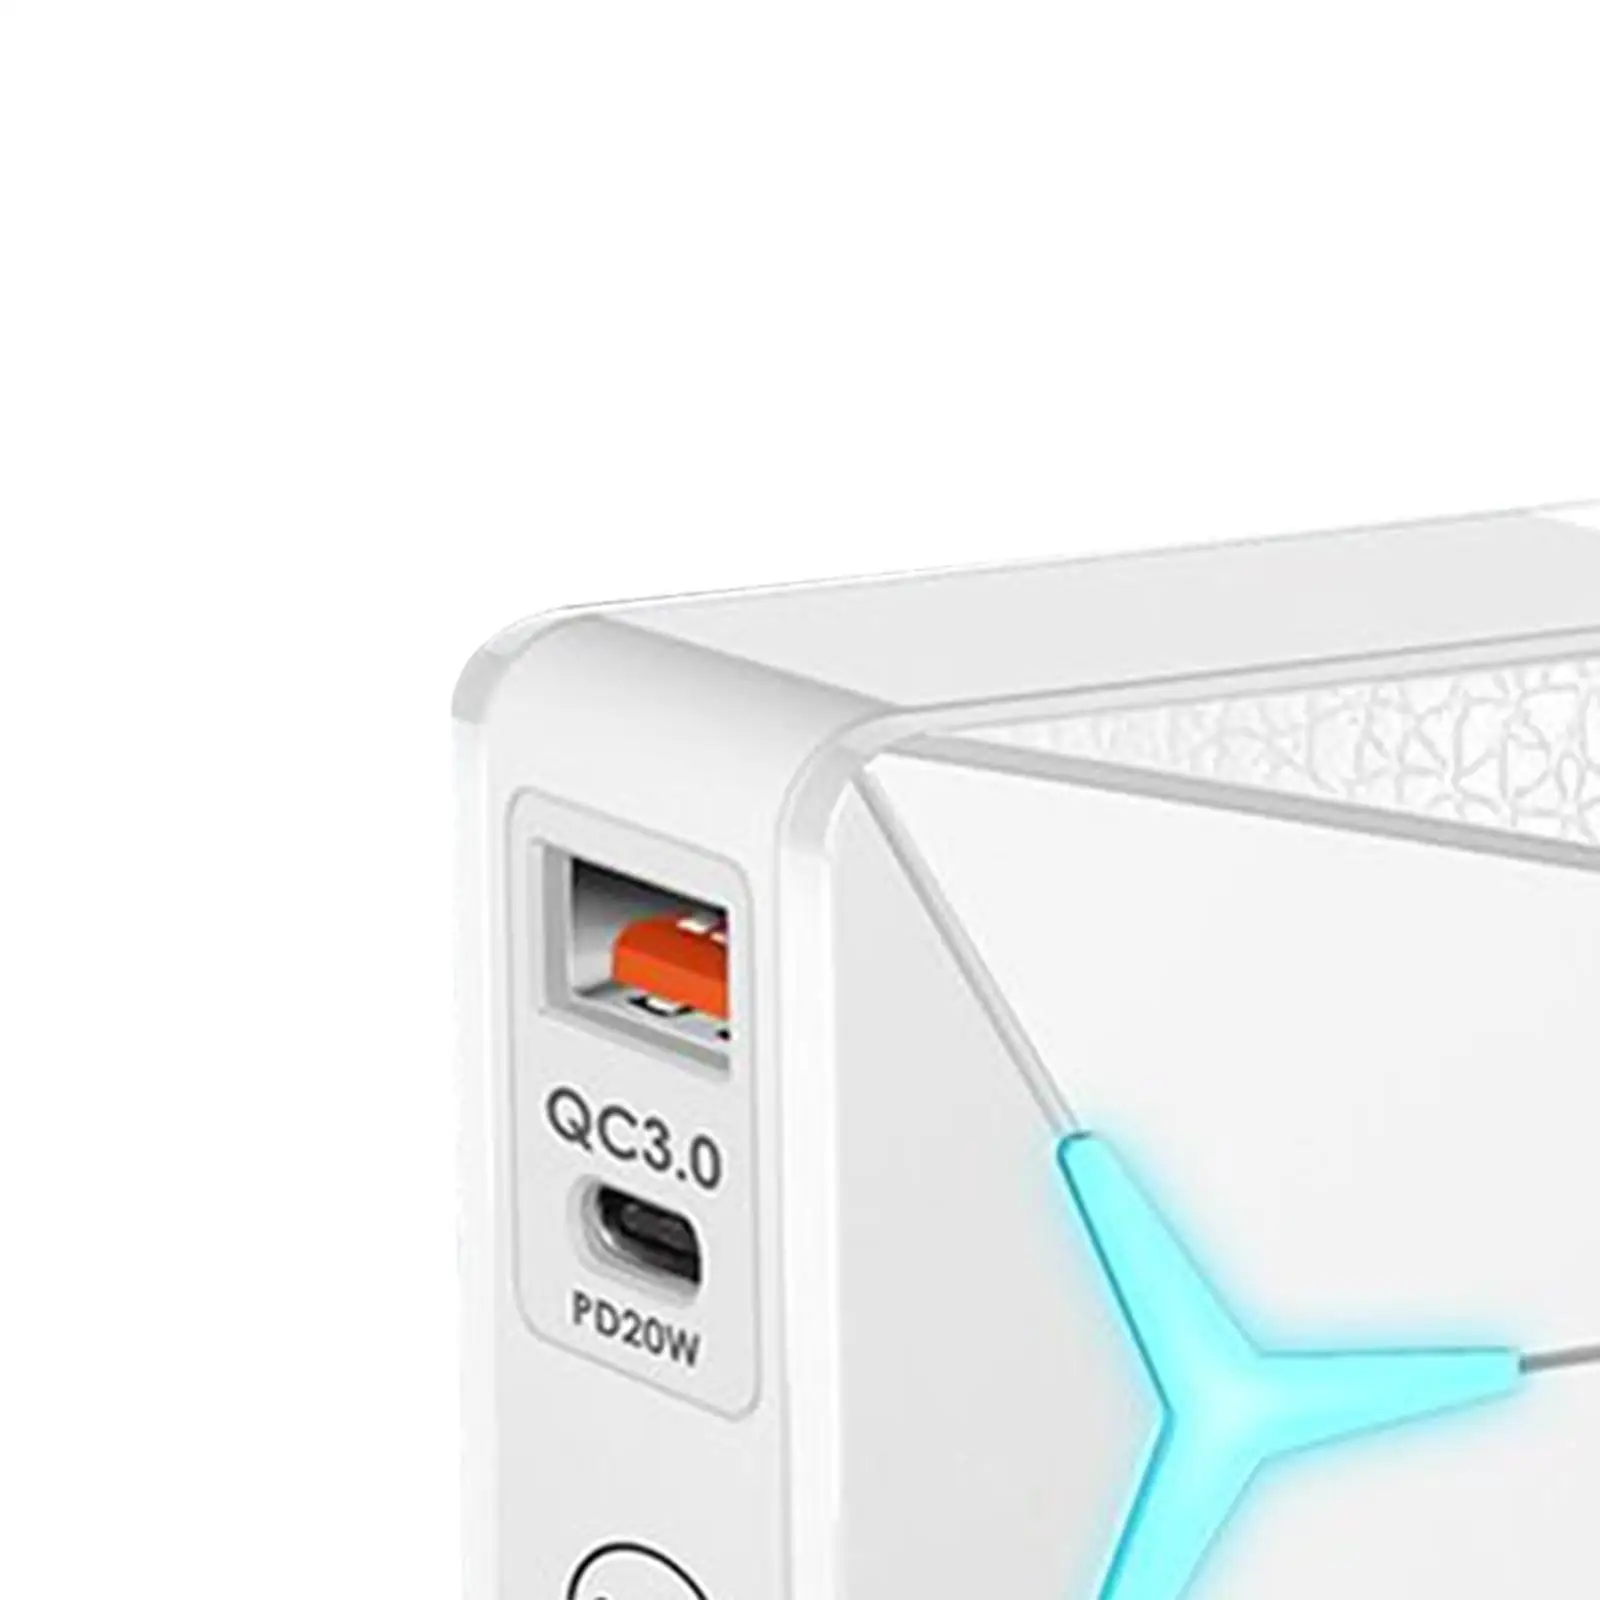 PD 20W QC3.0 Phone Charger Plug Portable Quick Charging USB Converter Wall Charger Charging Block for Home Use Travel White